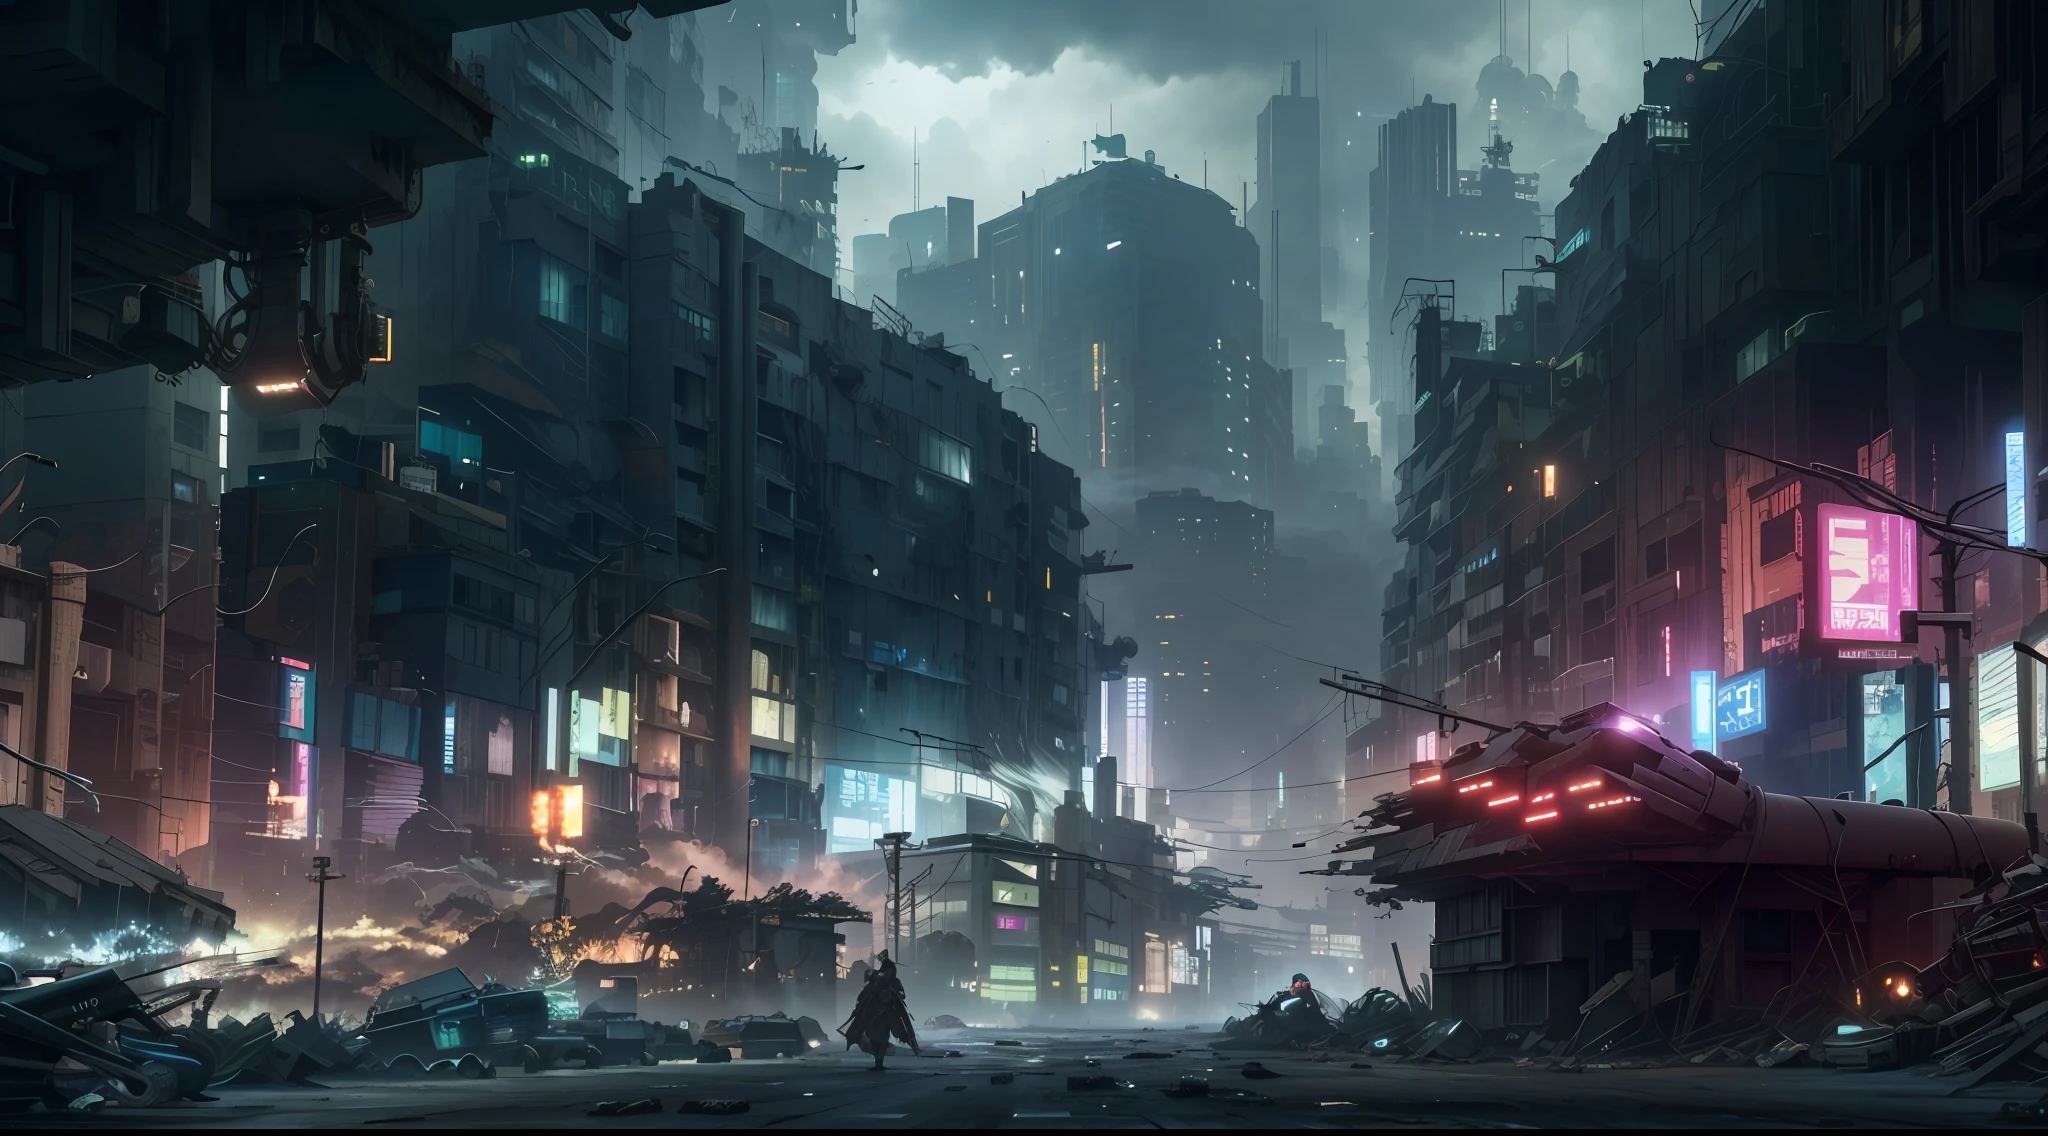 there is a picture of a city street with a lot of buildings, digital concept art of dystopian, dirty cyberpunk city, cyberpunk apocalyptic city, post - apocalyptic city streets, cyberpunk city abandoned, dystopian scifi apocalypse, dystopian cyberpunk city, dark cyberpunk metropolis, dark fantasy city, dire cyberpunk city, apocalyptic city, destroyed city, cyberpunk dark fantasy art, dark futuristic city, cyberpunk street